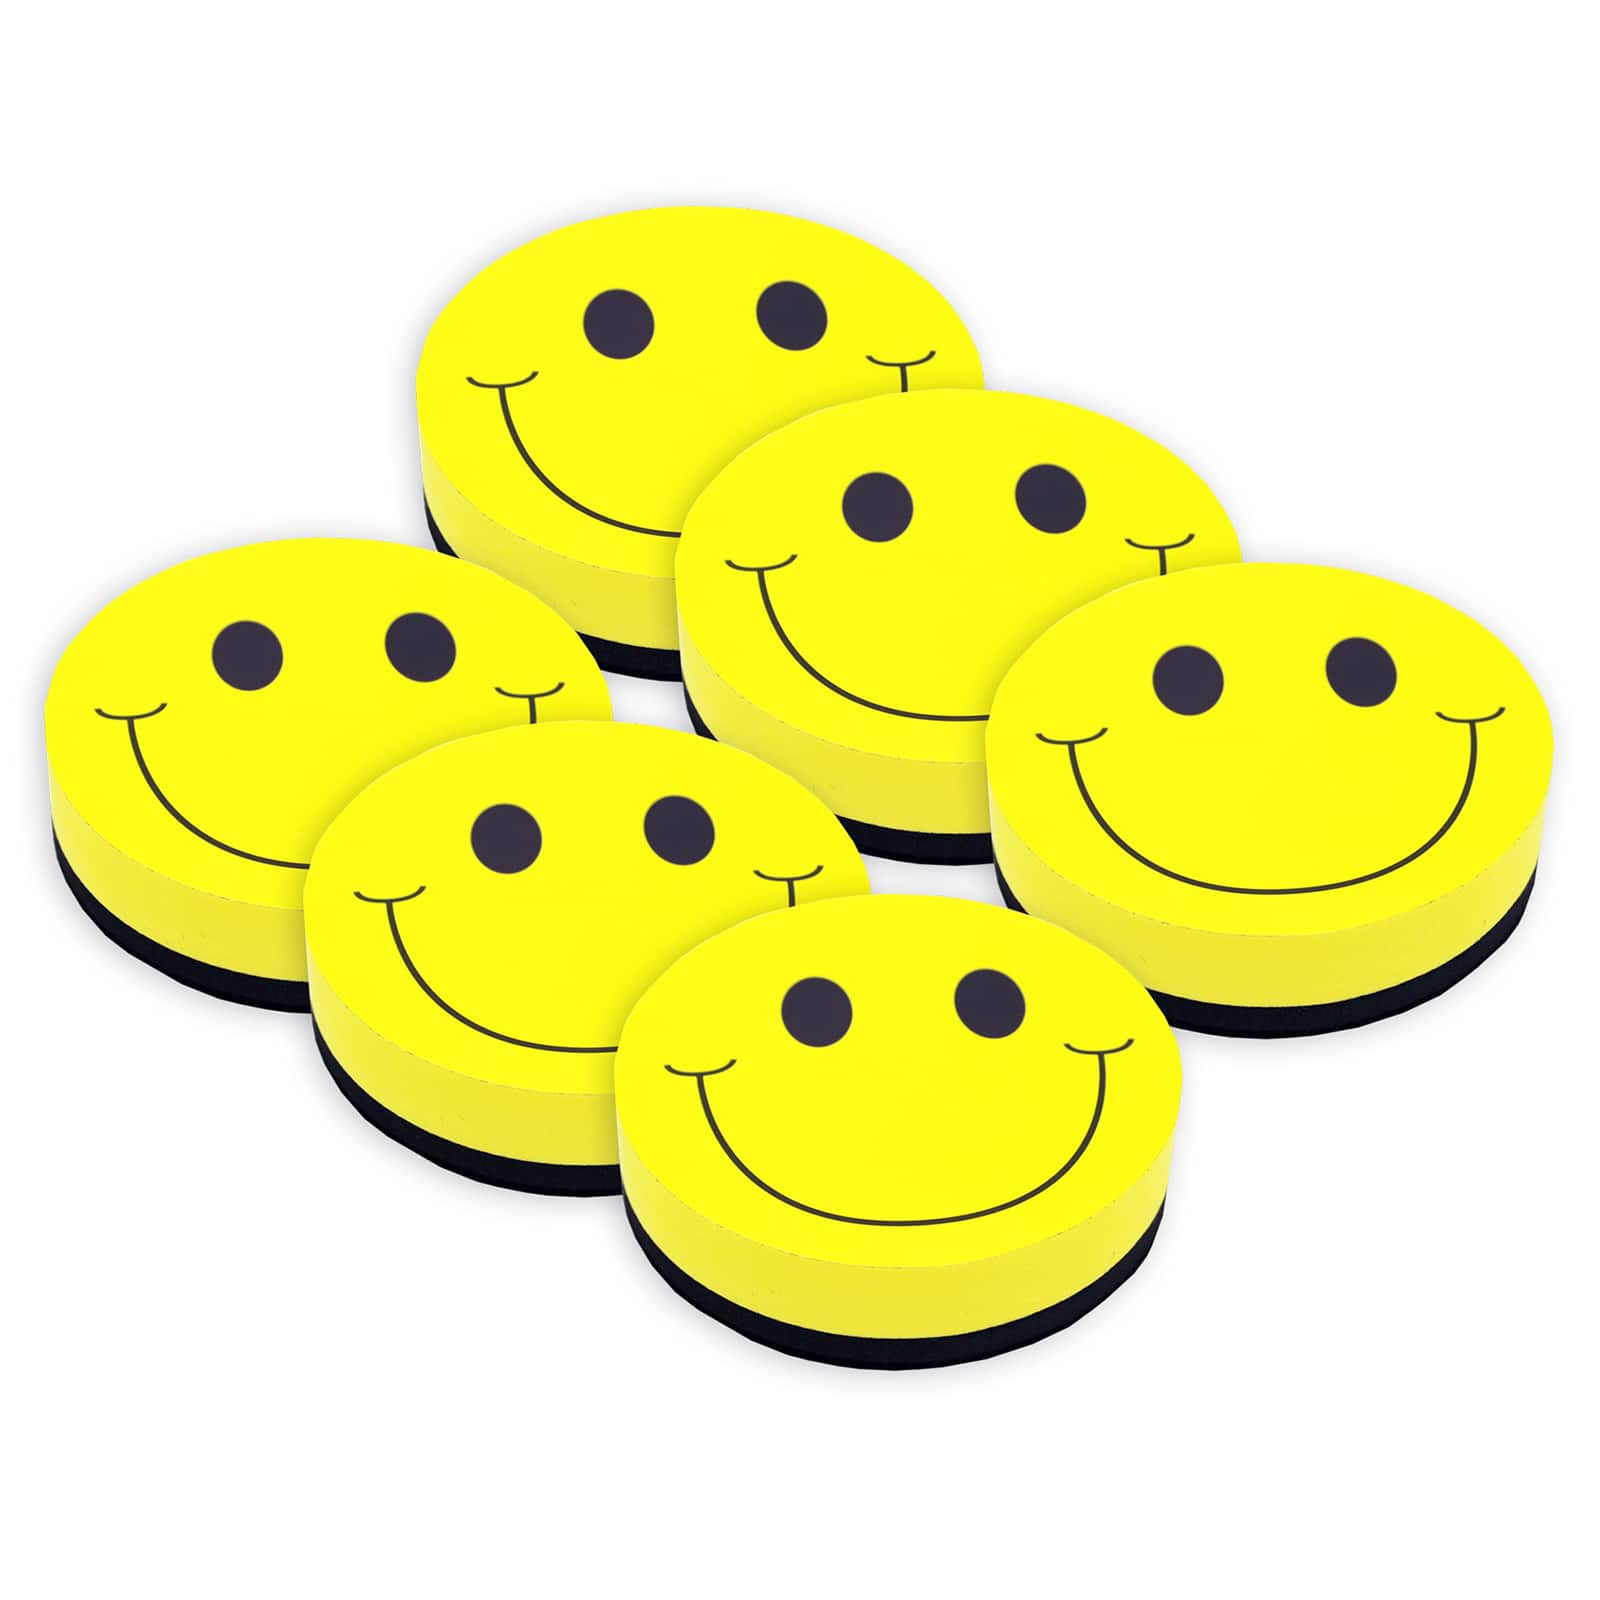 Ashley Productions Smile Face Magnetic Whiteboard Eraser, 6ct.